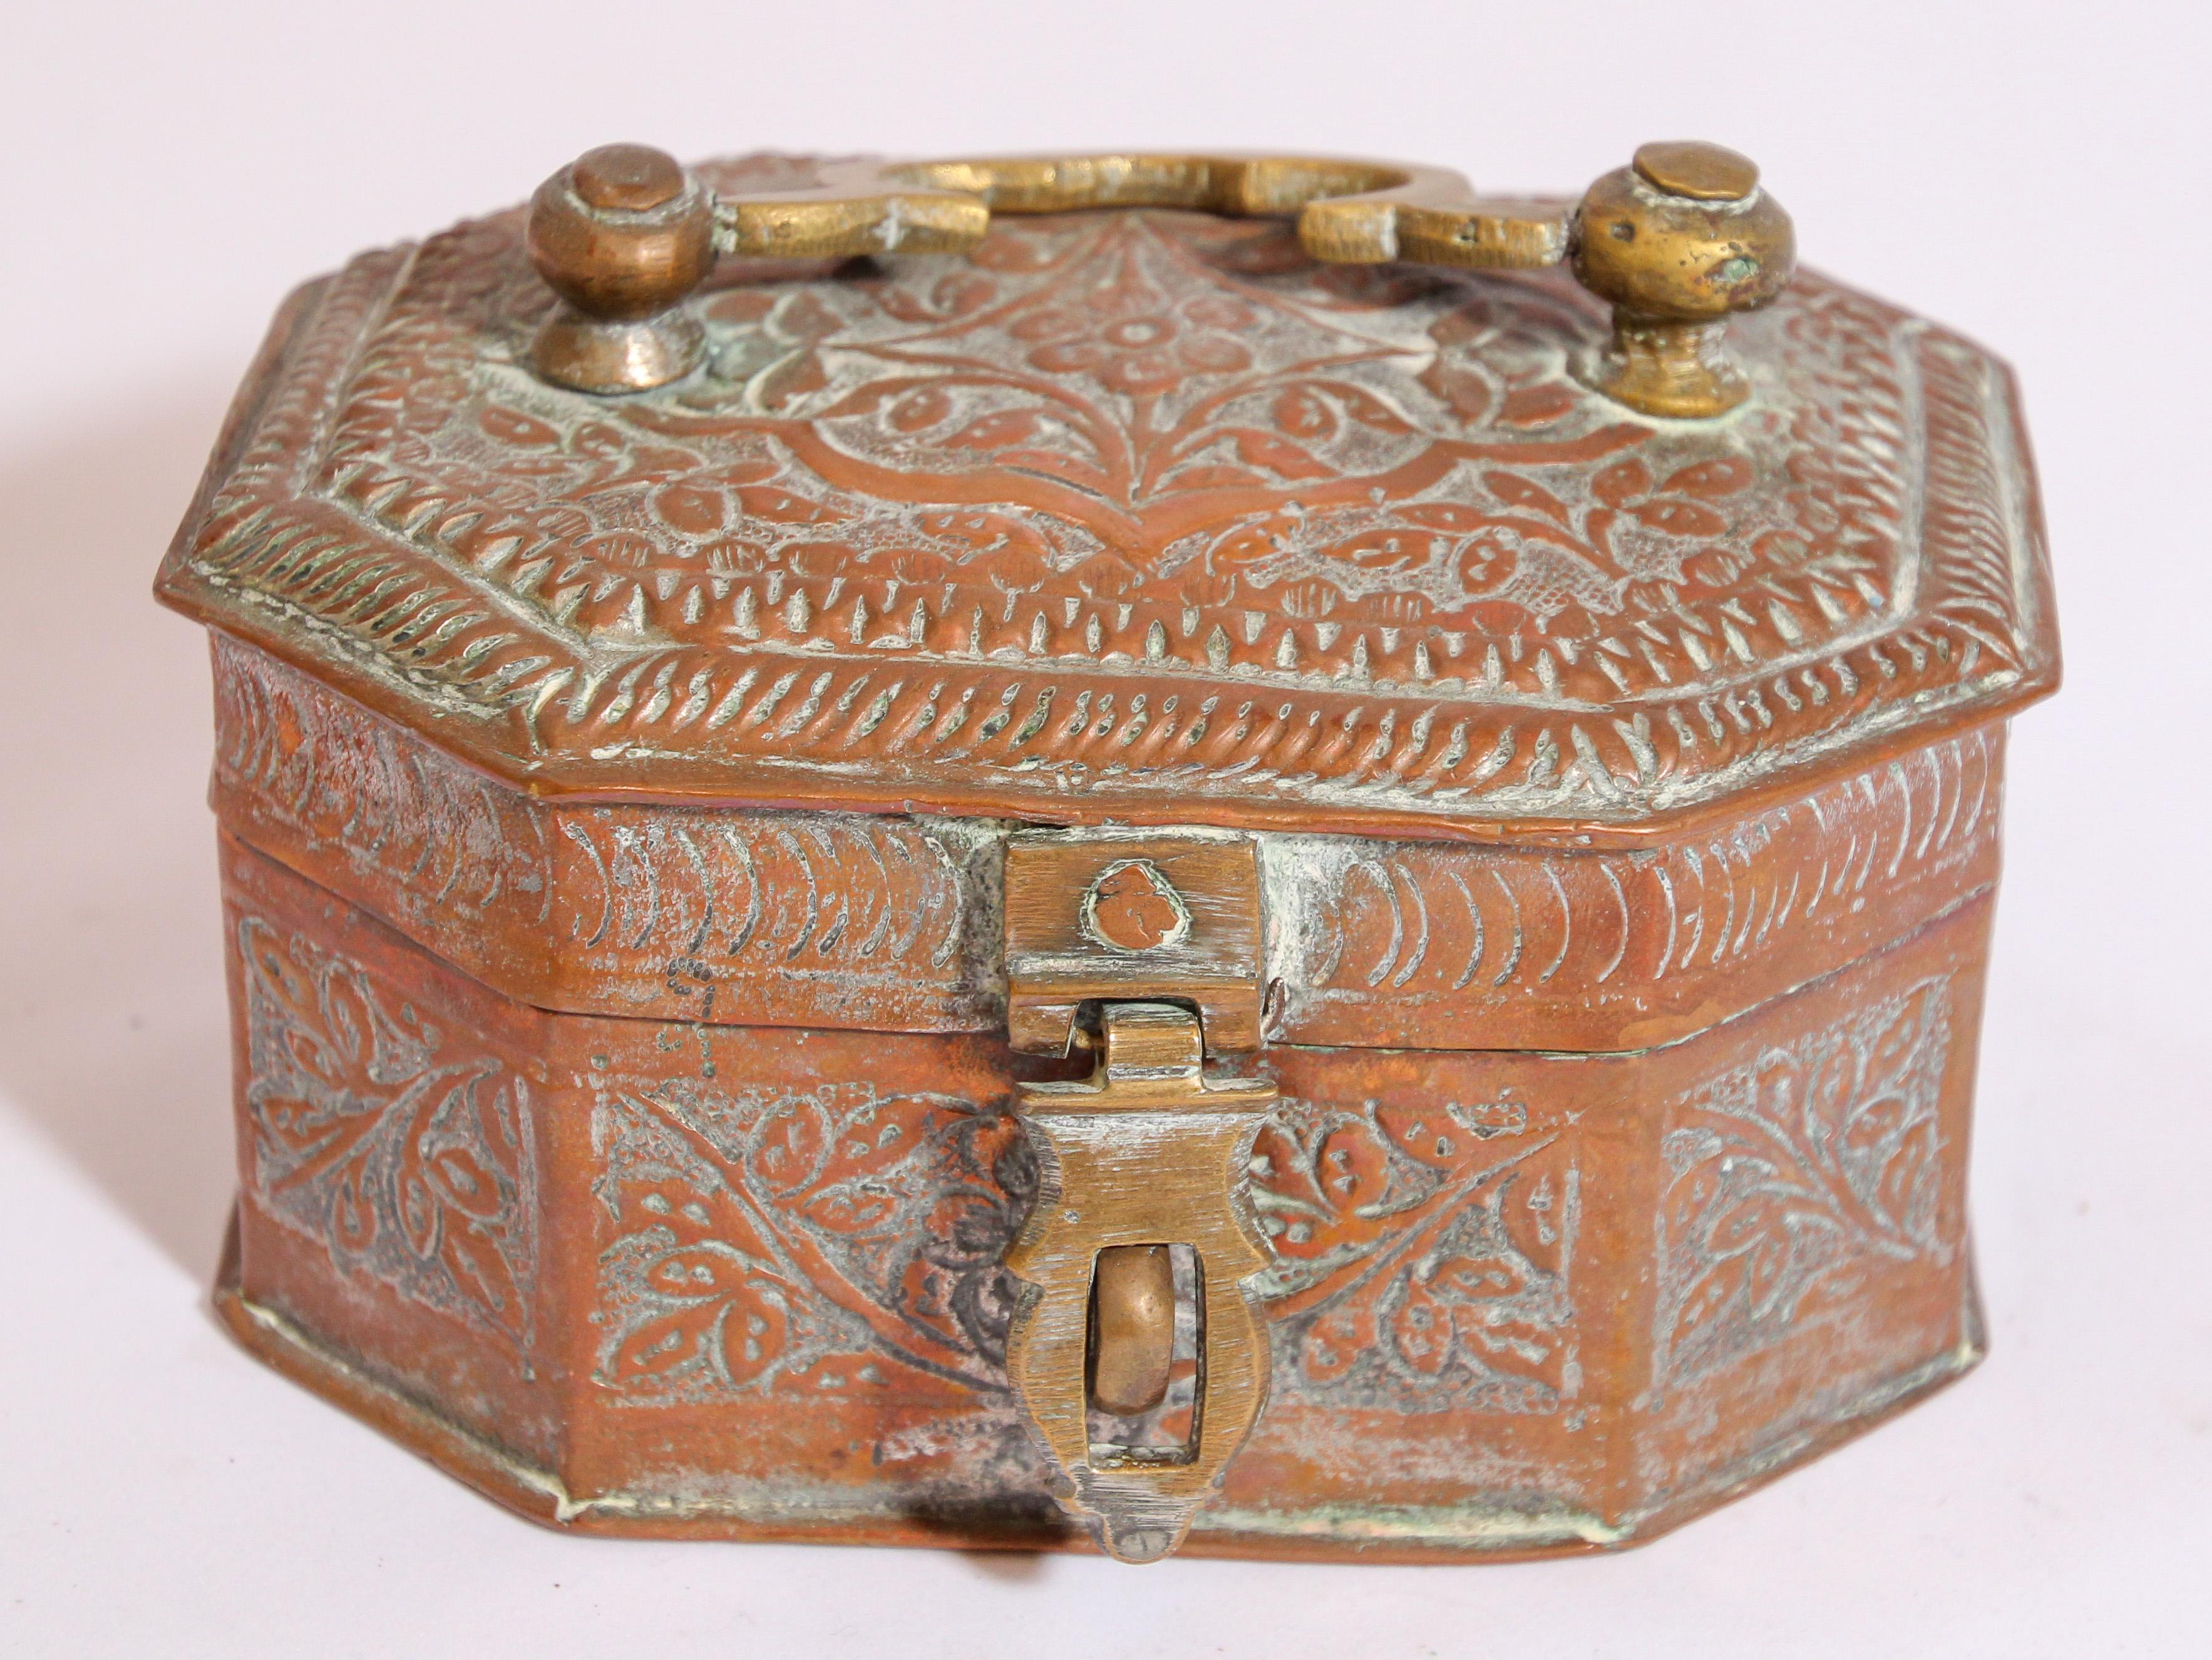 Beautiful handcrafted antique tinned copper decorative octagonal betel box with with lid, handle and brass latch.
The metal is delicately and intricately hand-hammered and repousse with floral and geometric designs.
This Vintage brass box is a Paan